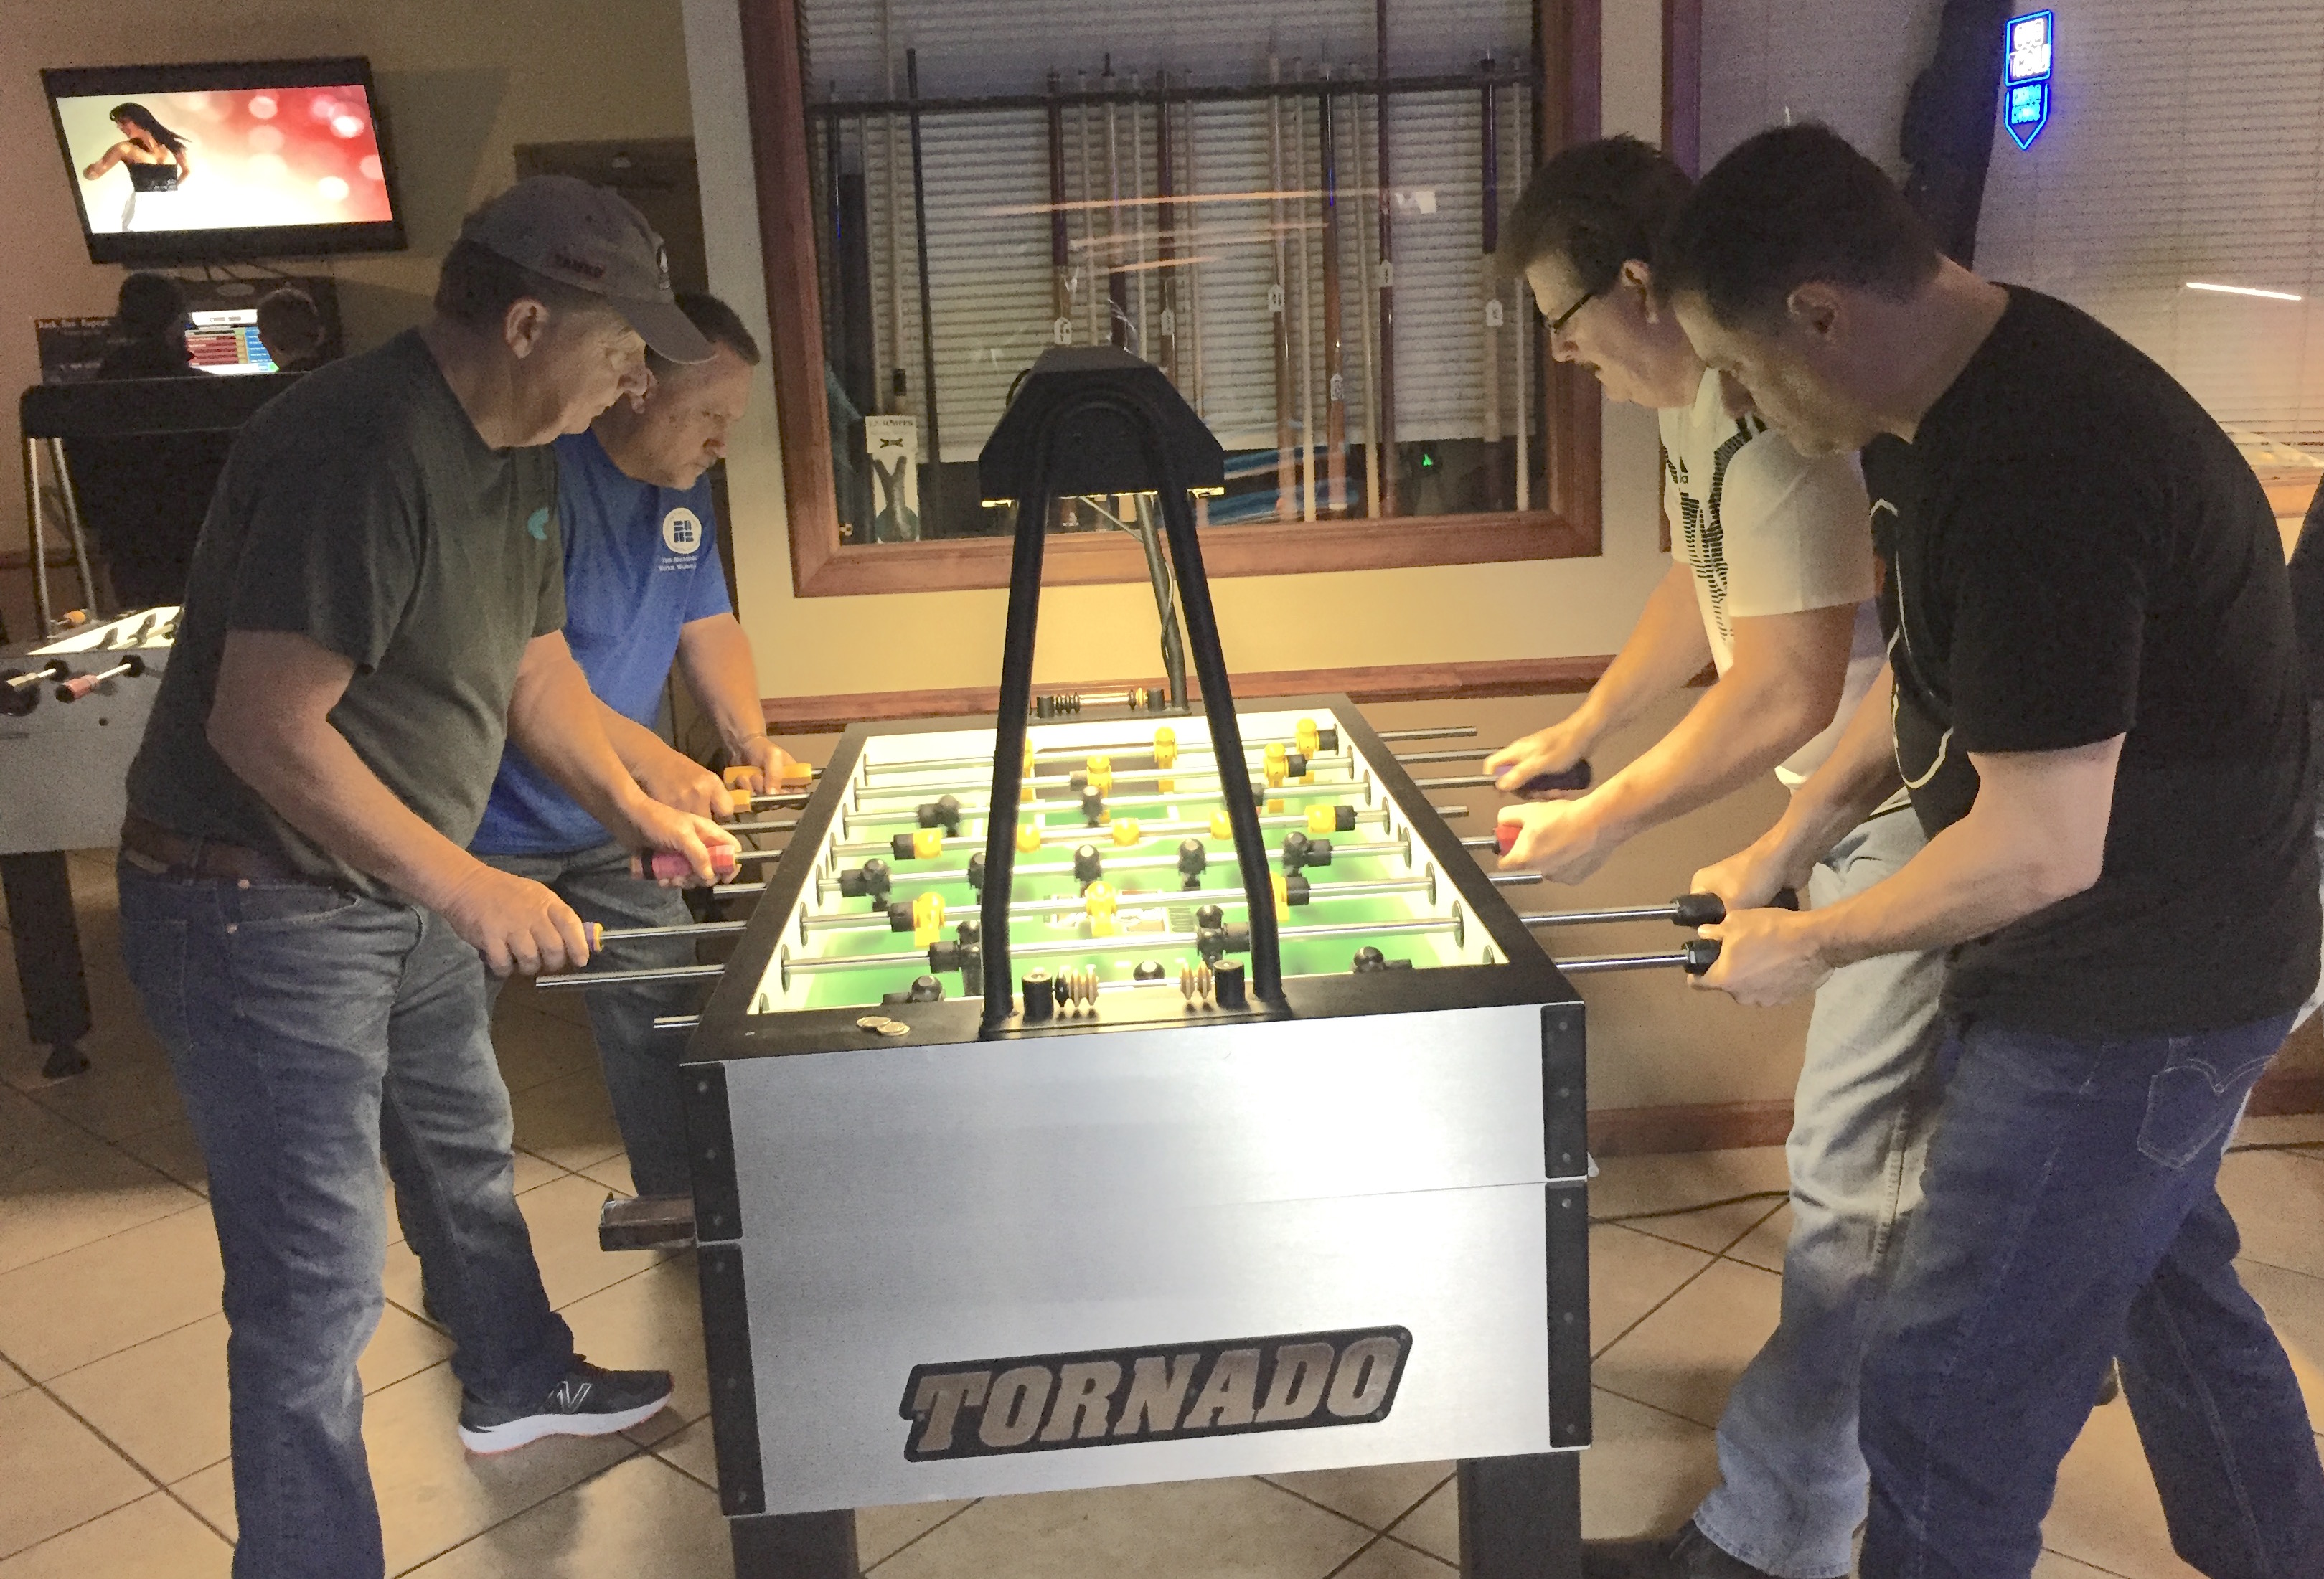 Pictured is foosball tournament action at 6 Pockets Bar & Billiards in Decatur,AL.